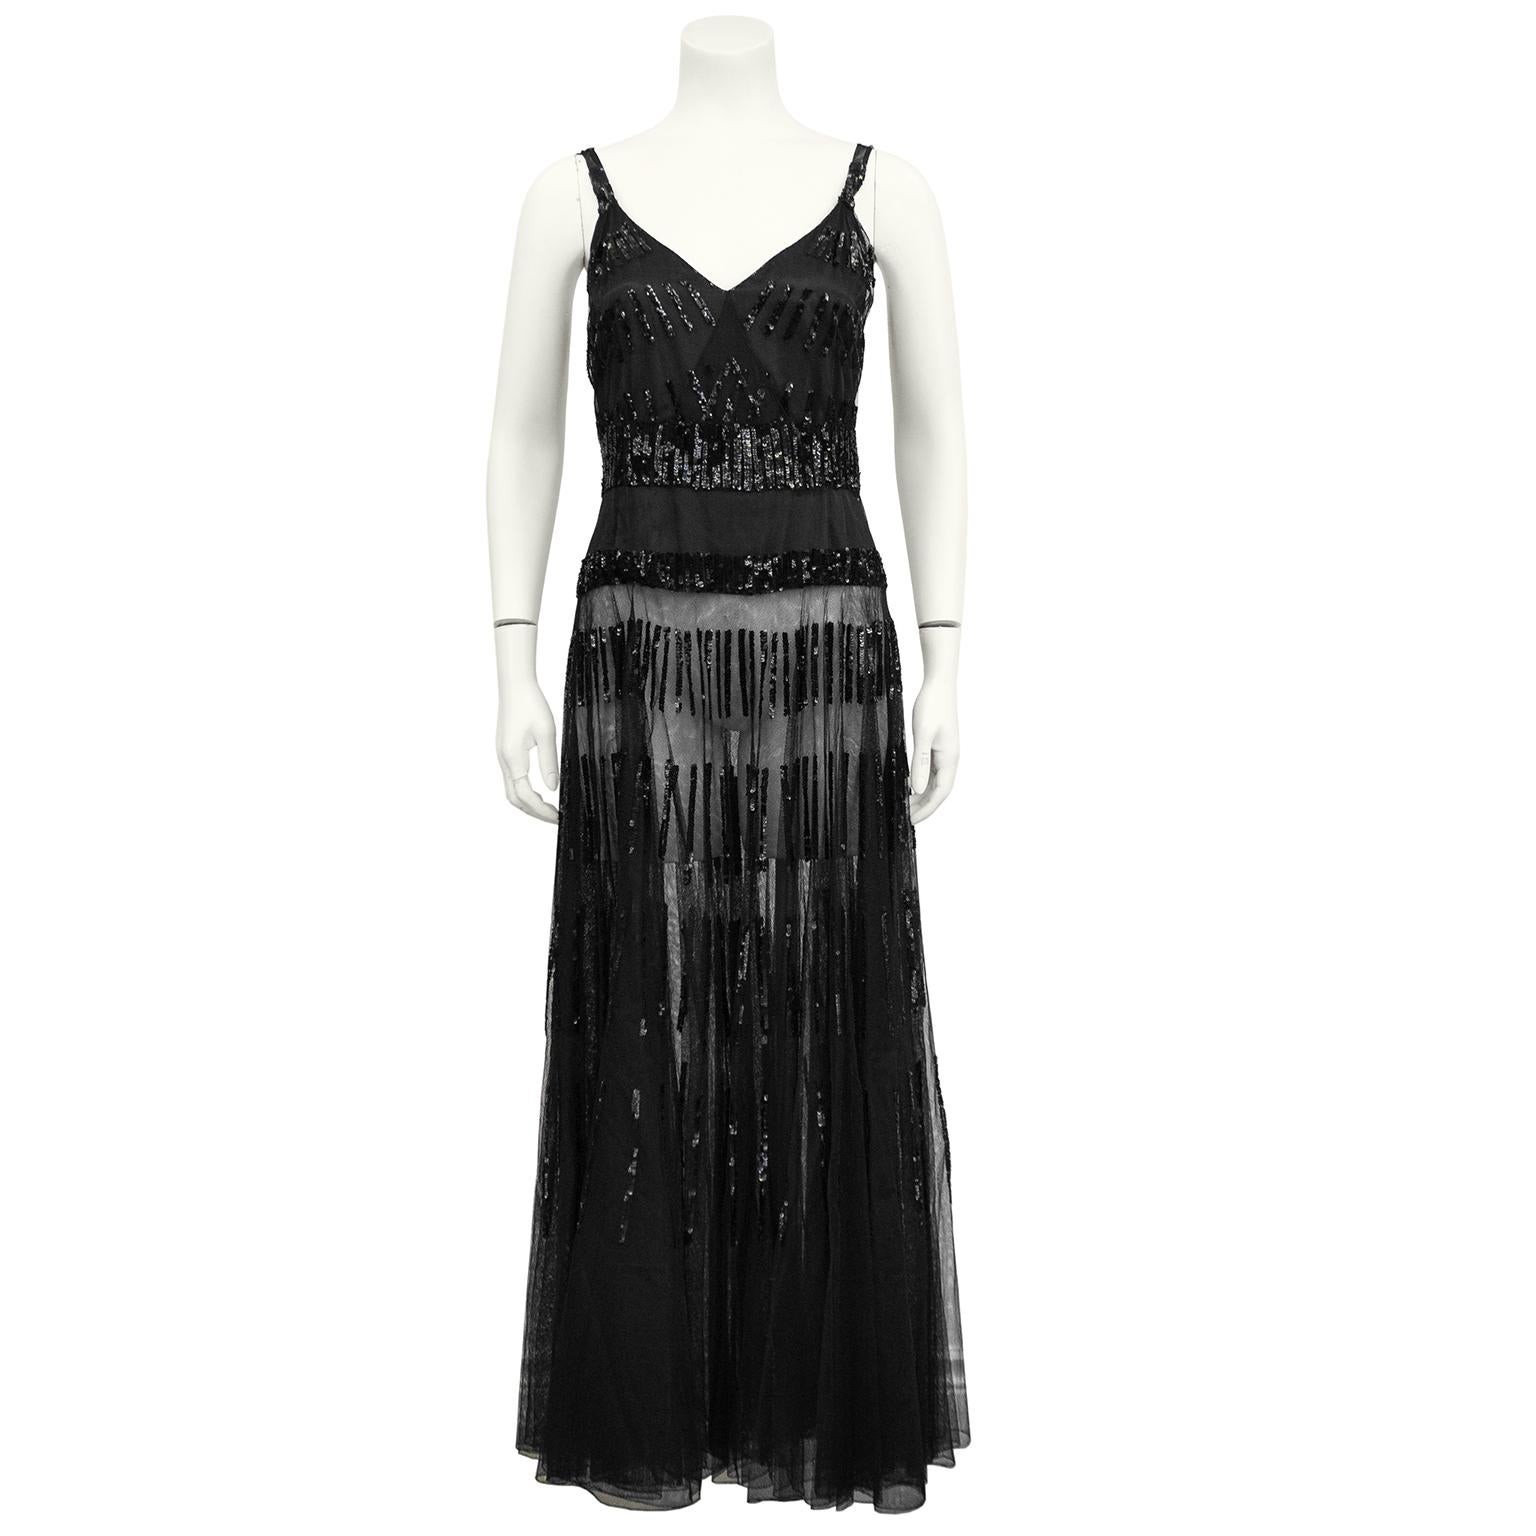 Stunning black sheer and beaded gown and bolero. Reminiscent of the slinky beaded and net gowns from the 1940's. Spaghetti straps with a v-neck line and a faux wrap style bodice. Small jet black sequin embellish the straps and bodice with small